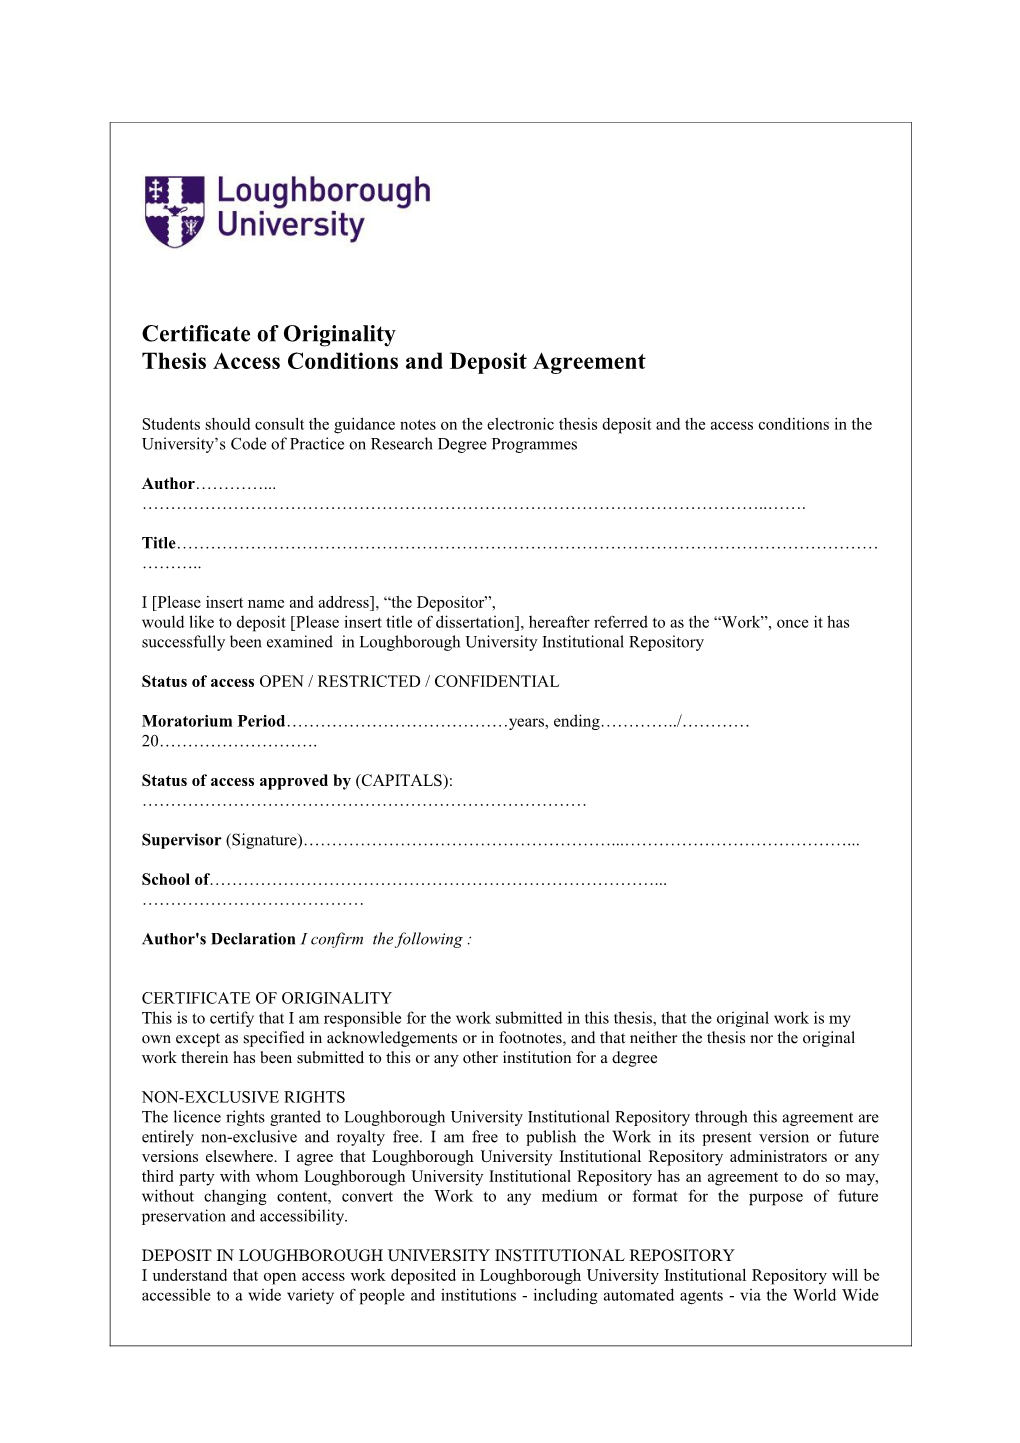 Thesis Access Form